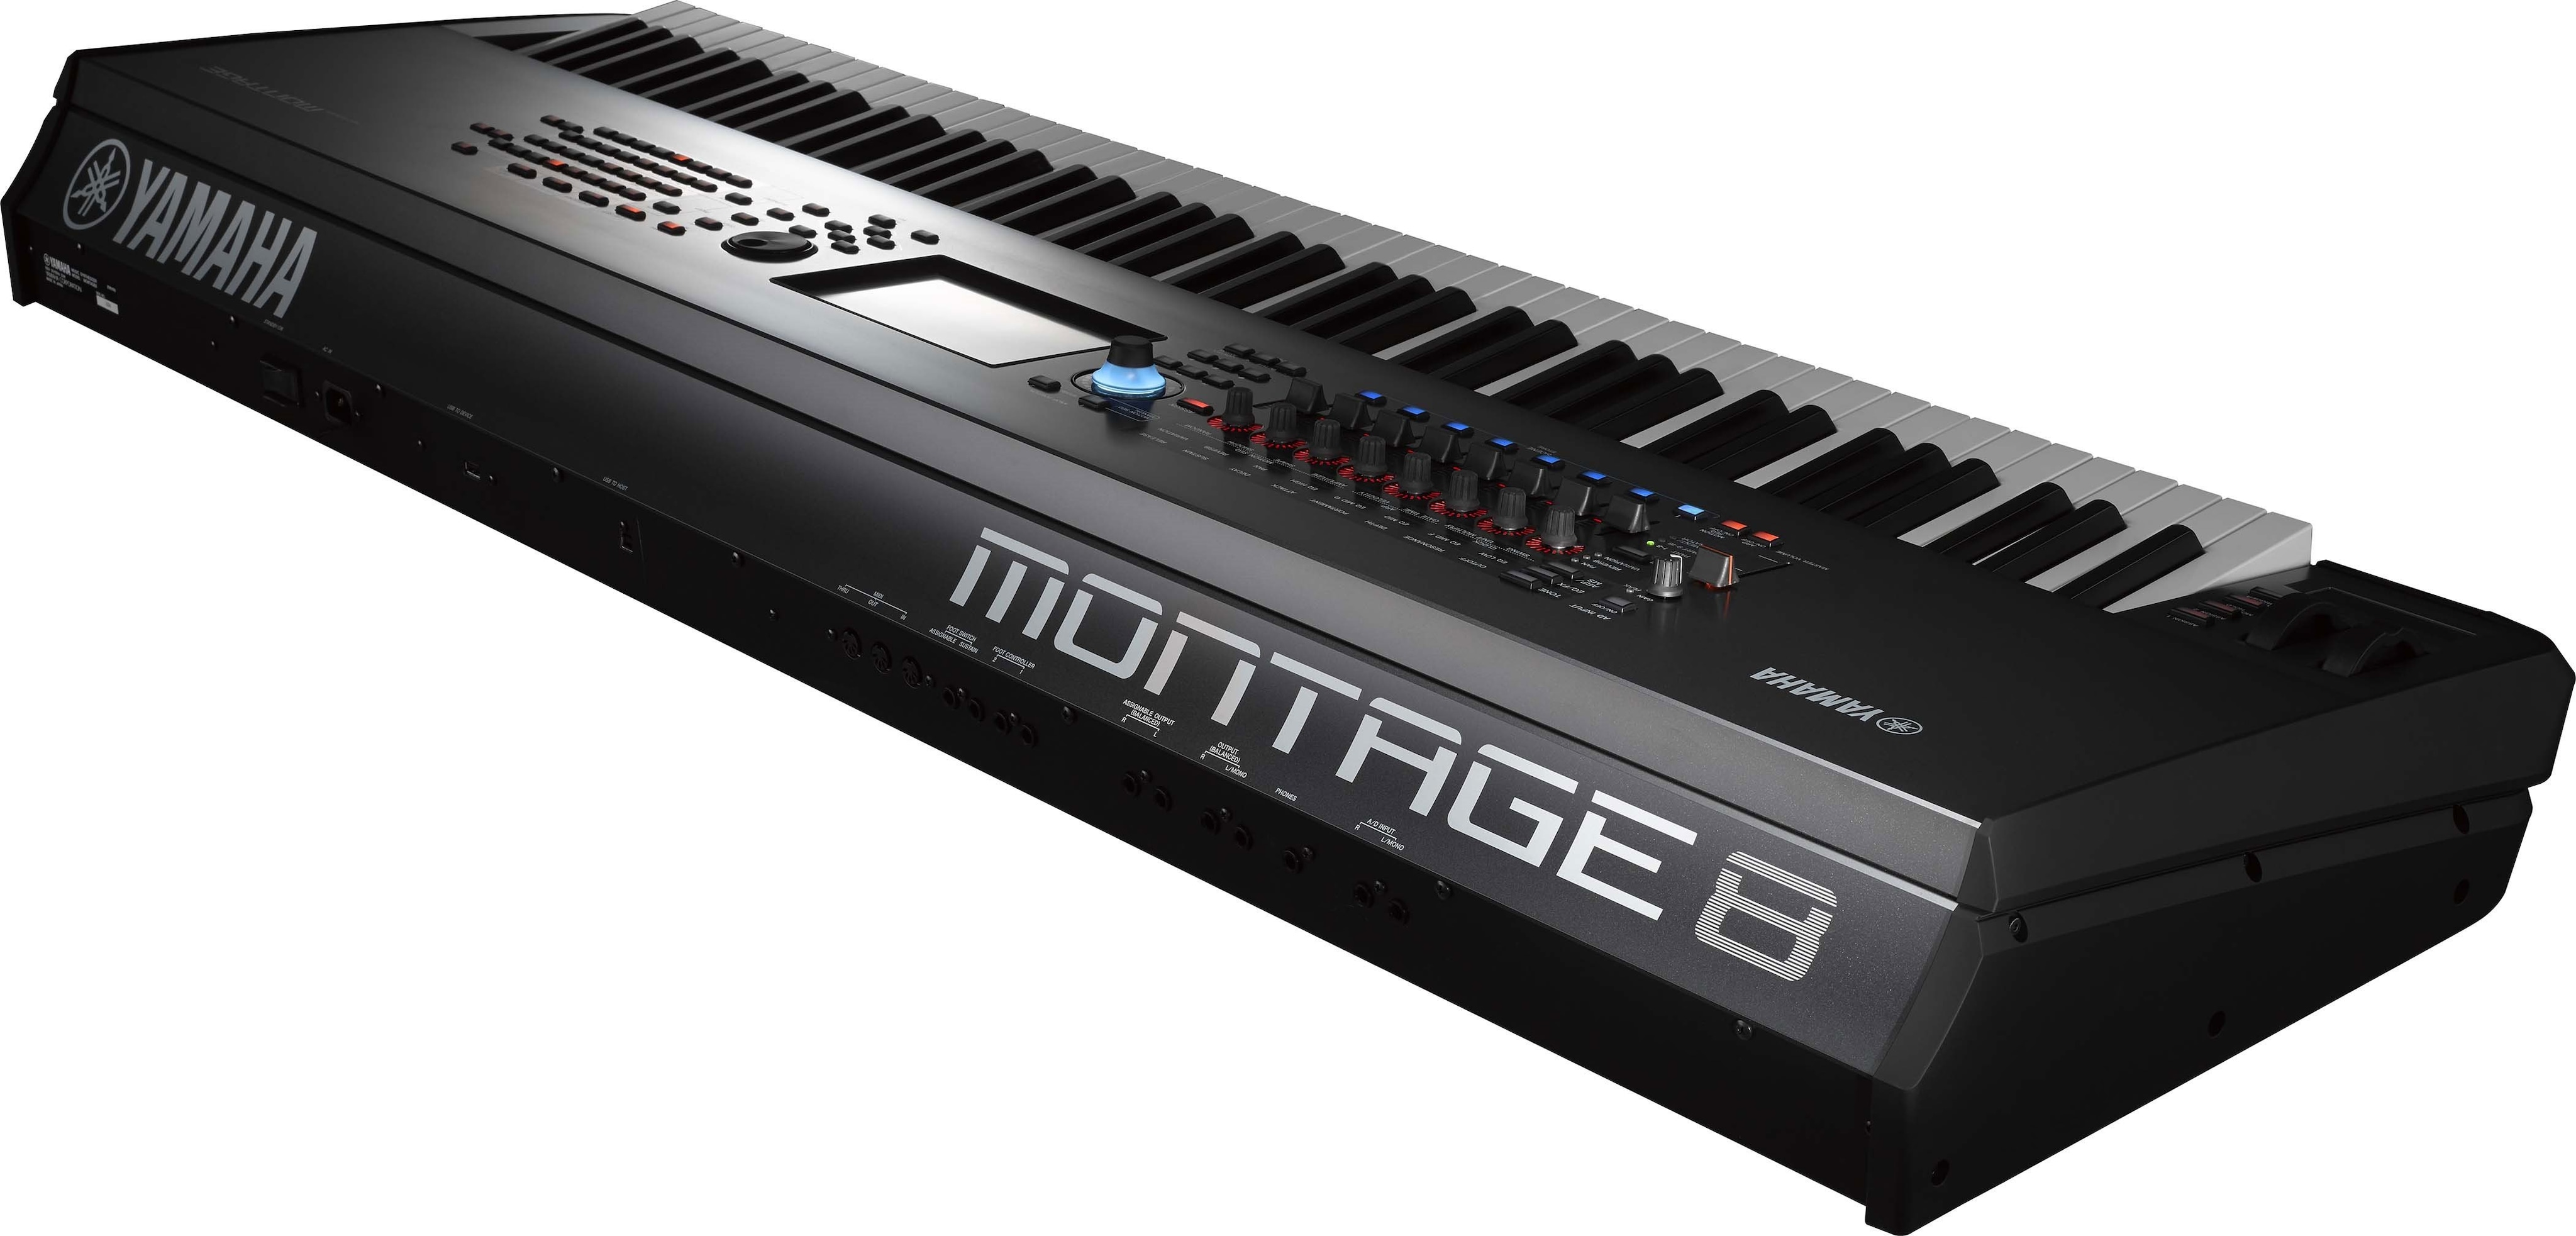 MONTAGE - Overview - Synthesizers - Synthesizers & Music 